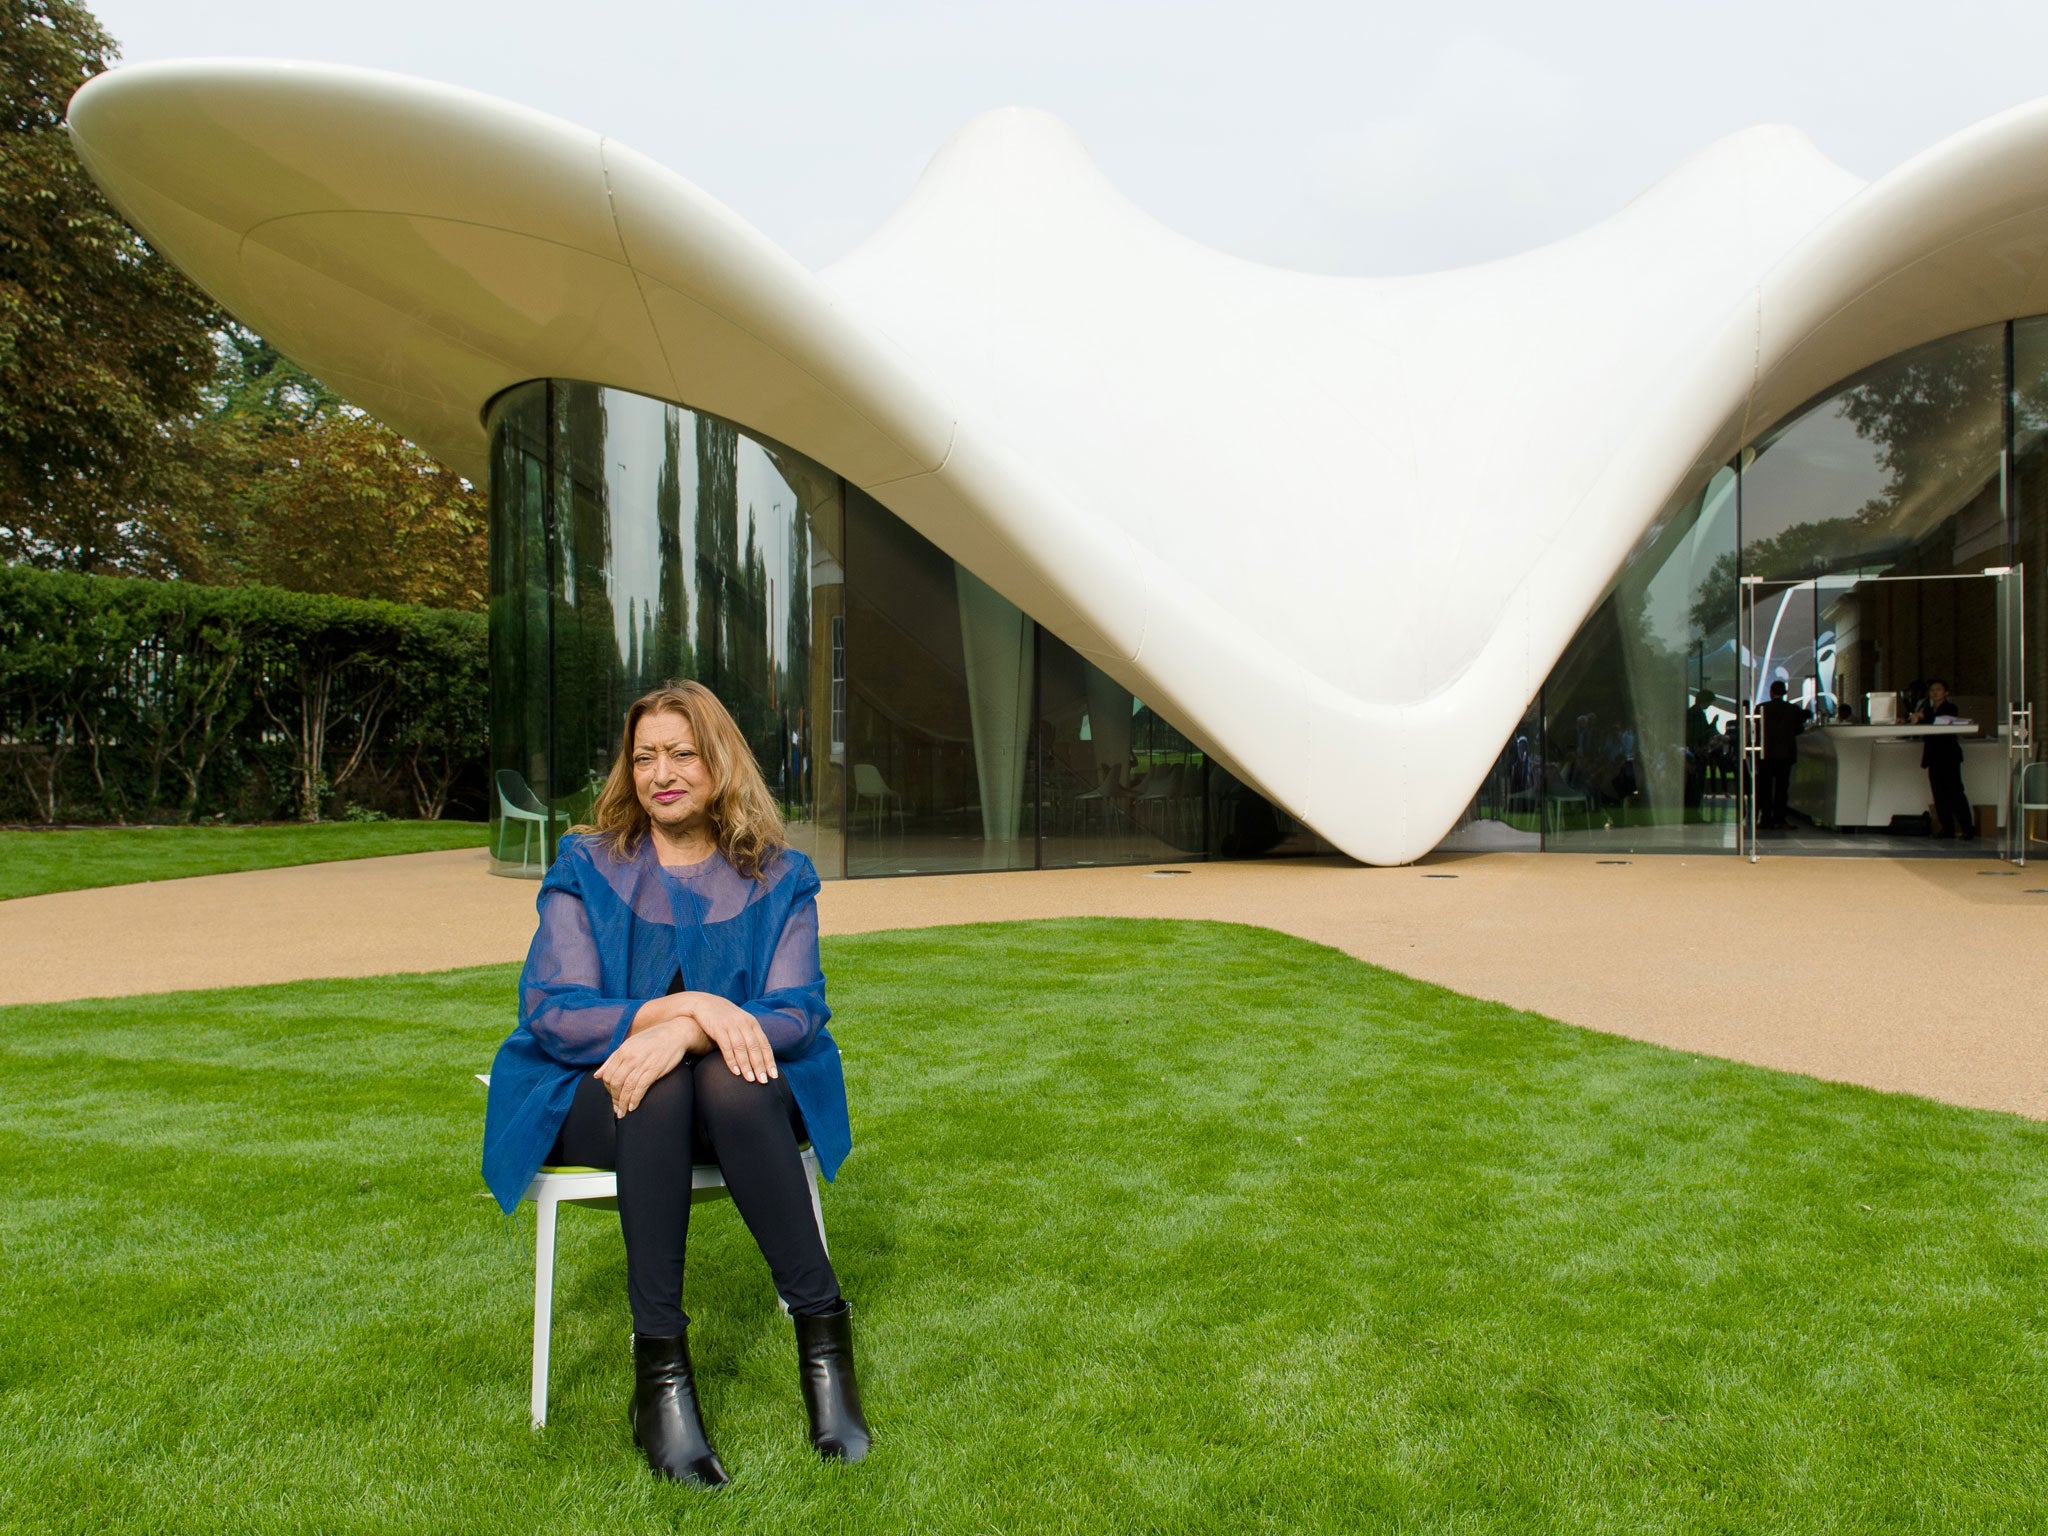 Iraqi-British architect Zaha Hadid is one of the few women who has made it to the top